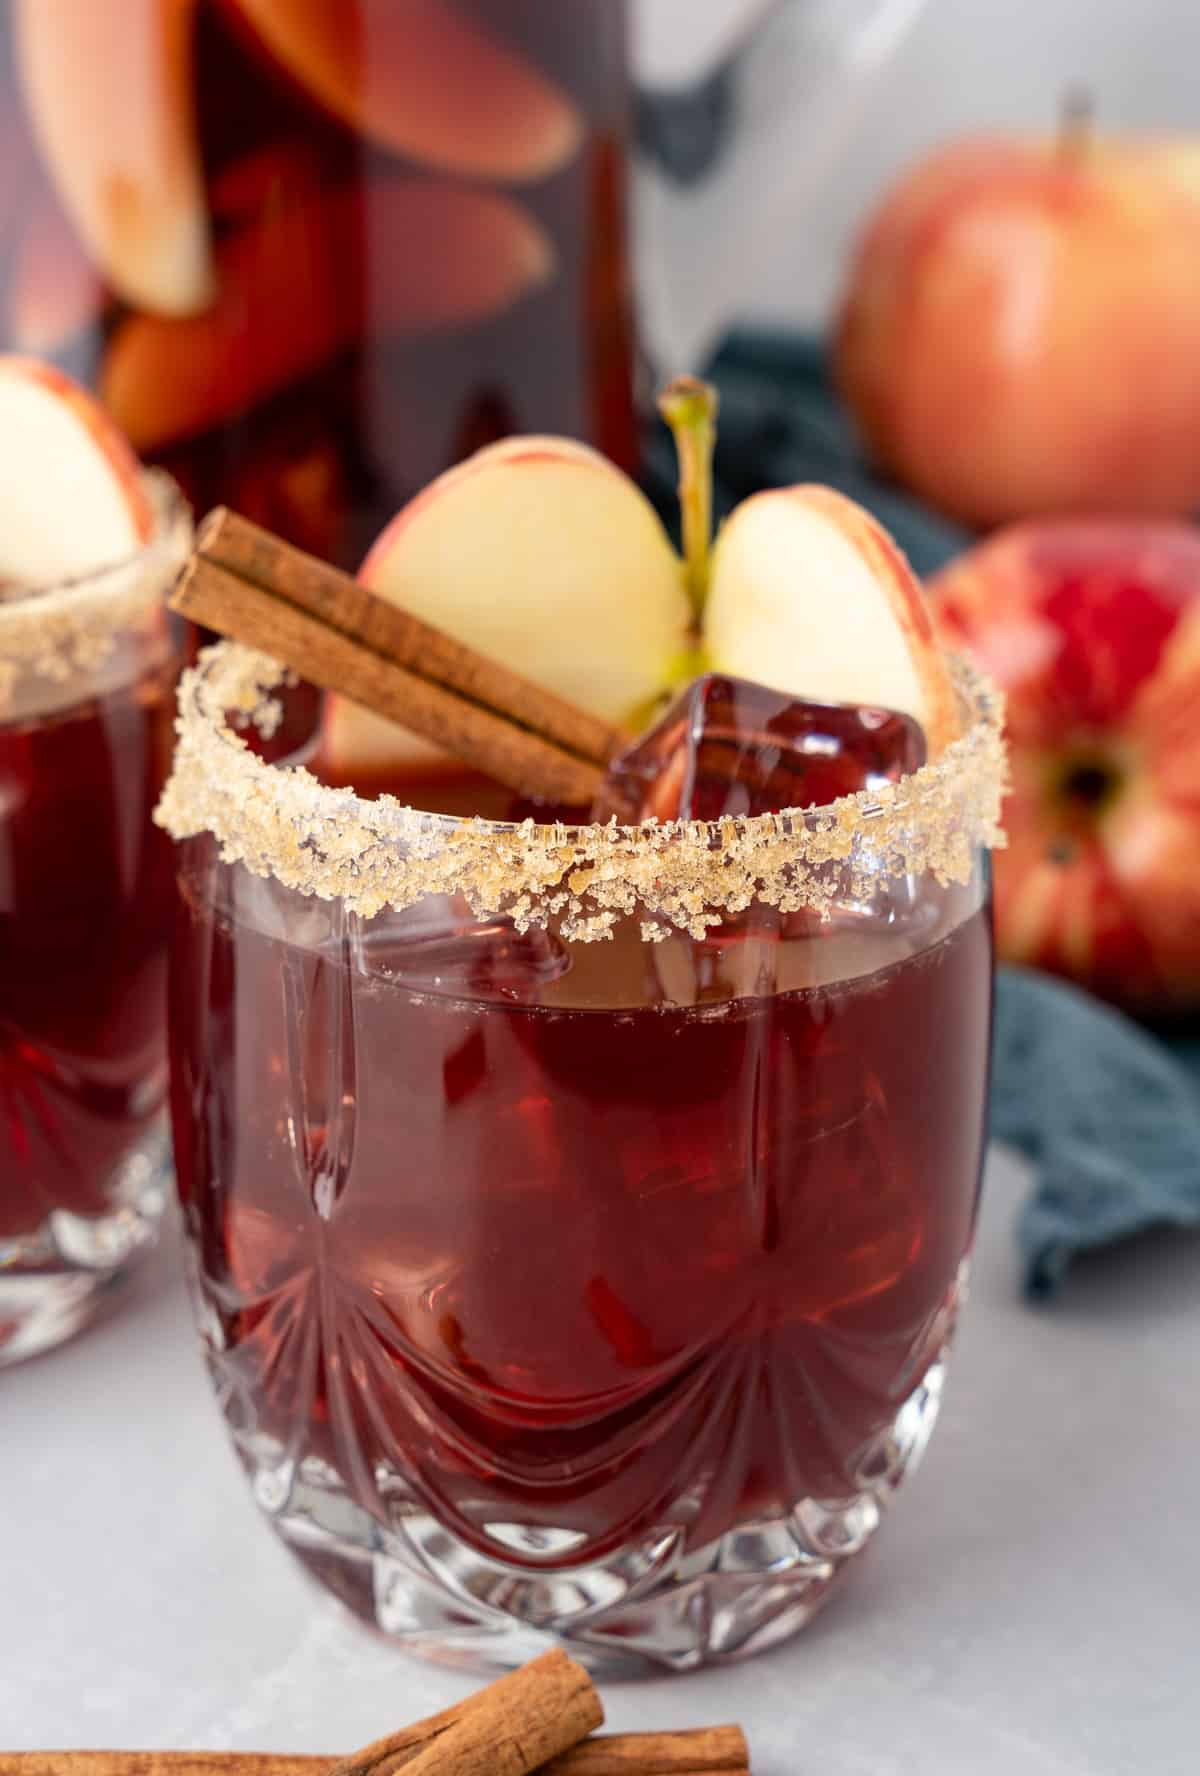 Apple Cider Sangria in glass rimmed with brown sugar and garnished with apple and cinnamon stick.